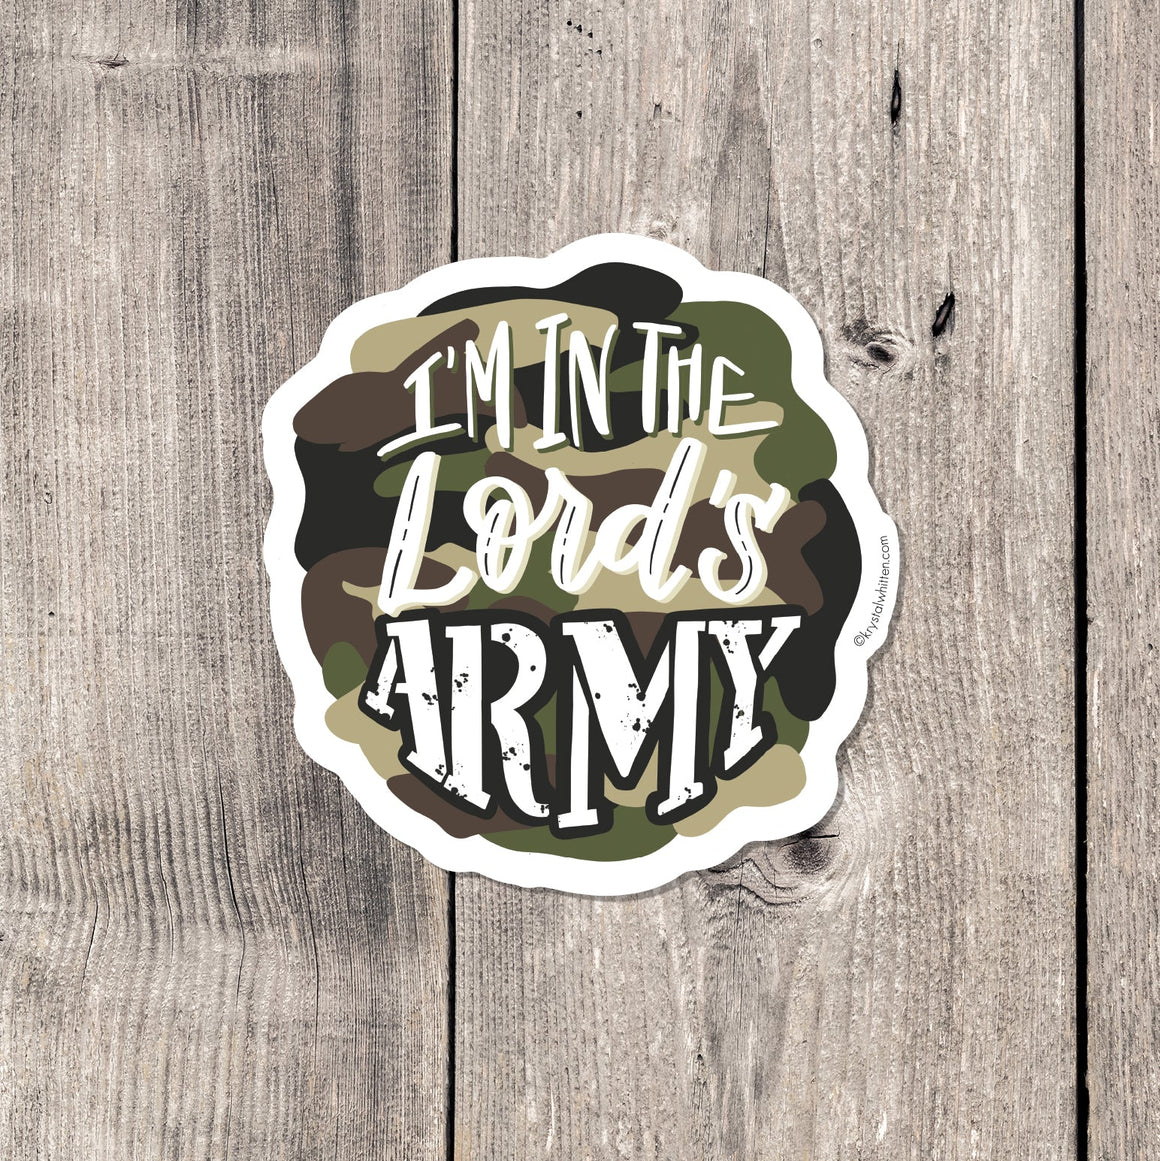 "Lord's Army" sticker